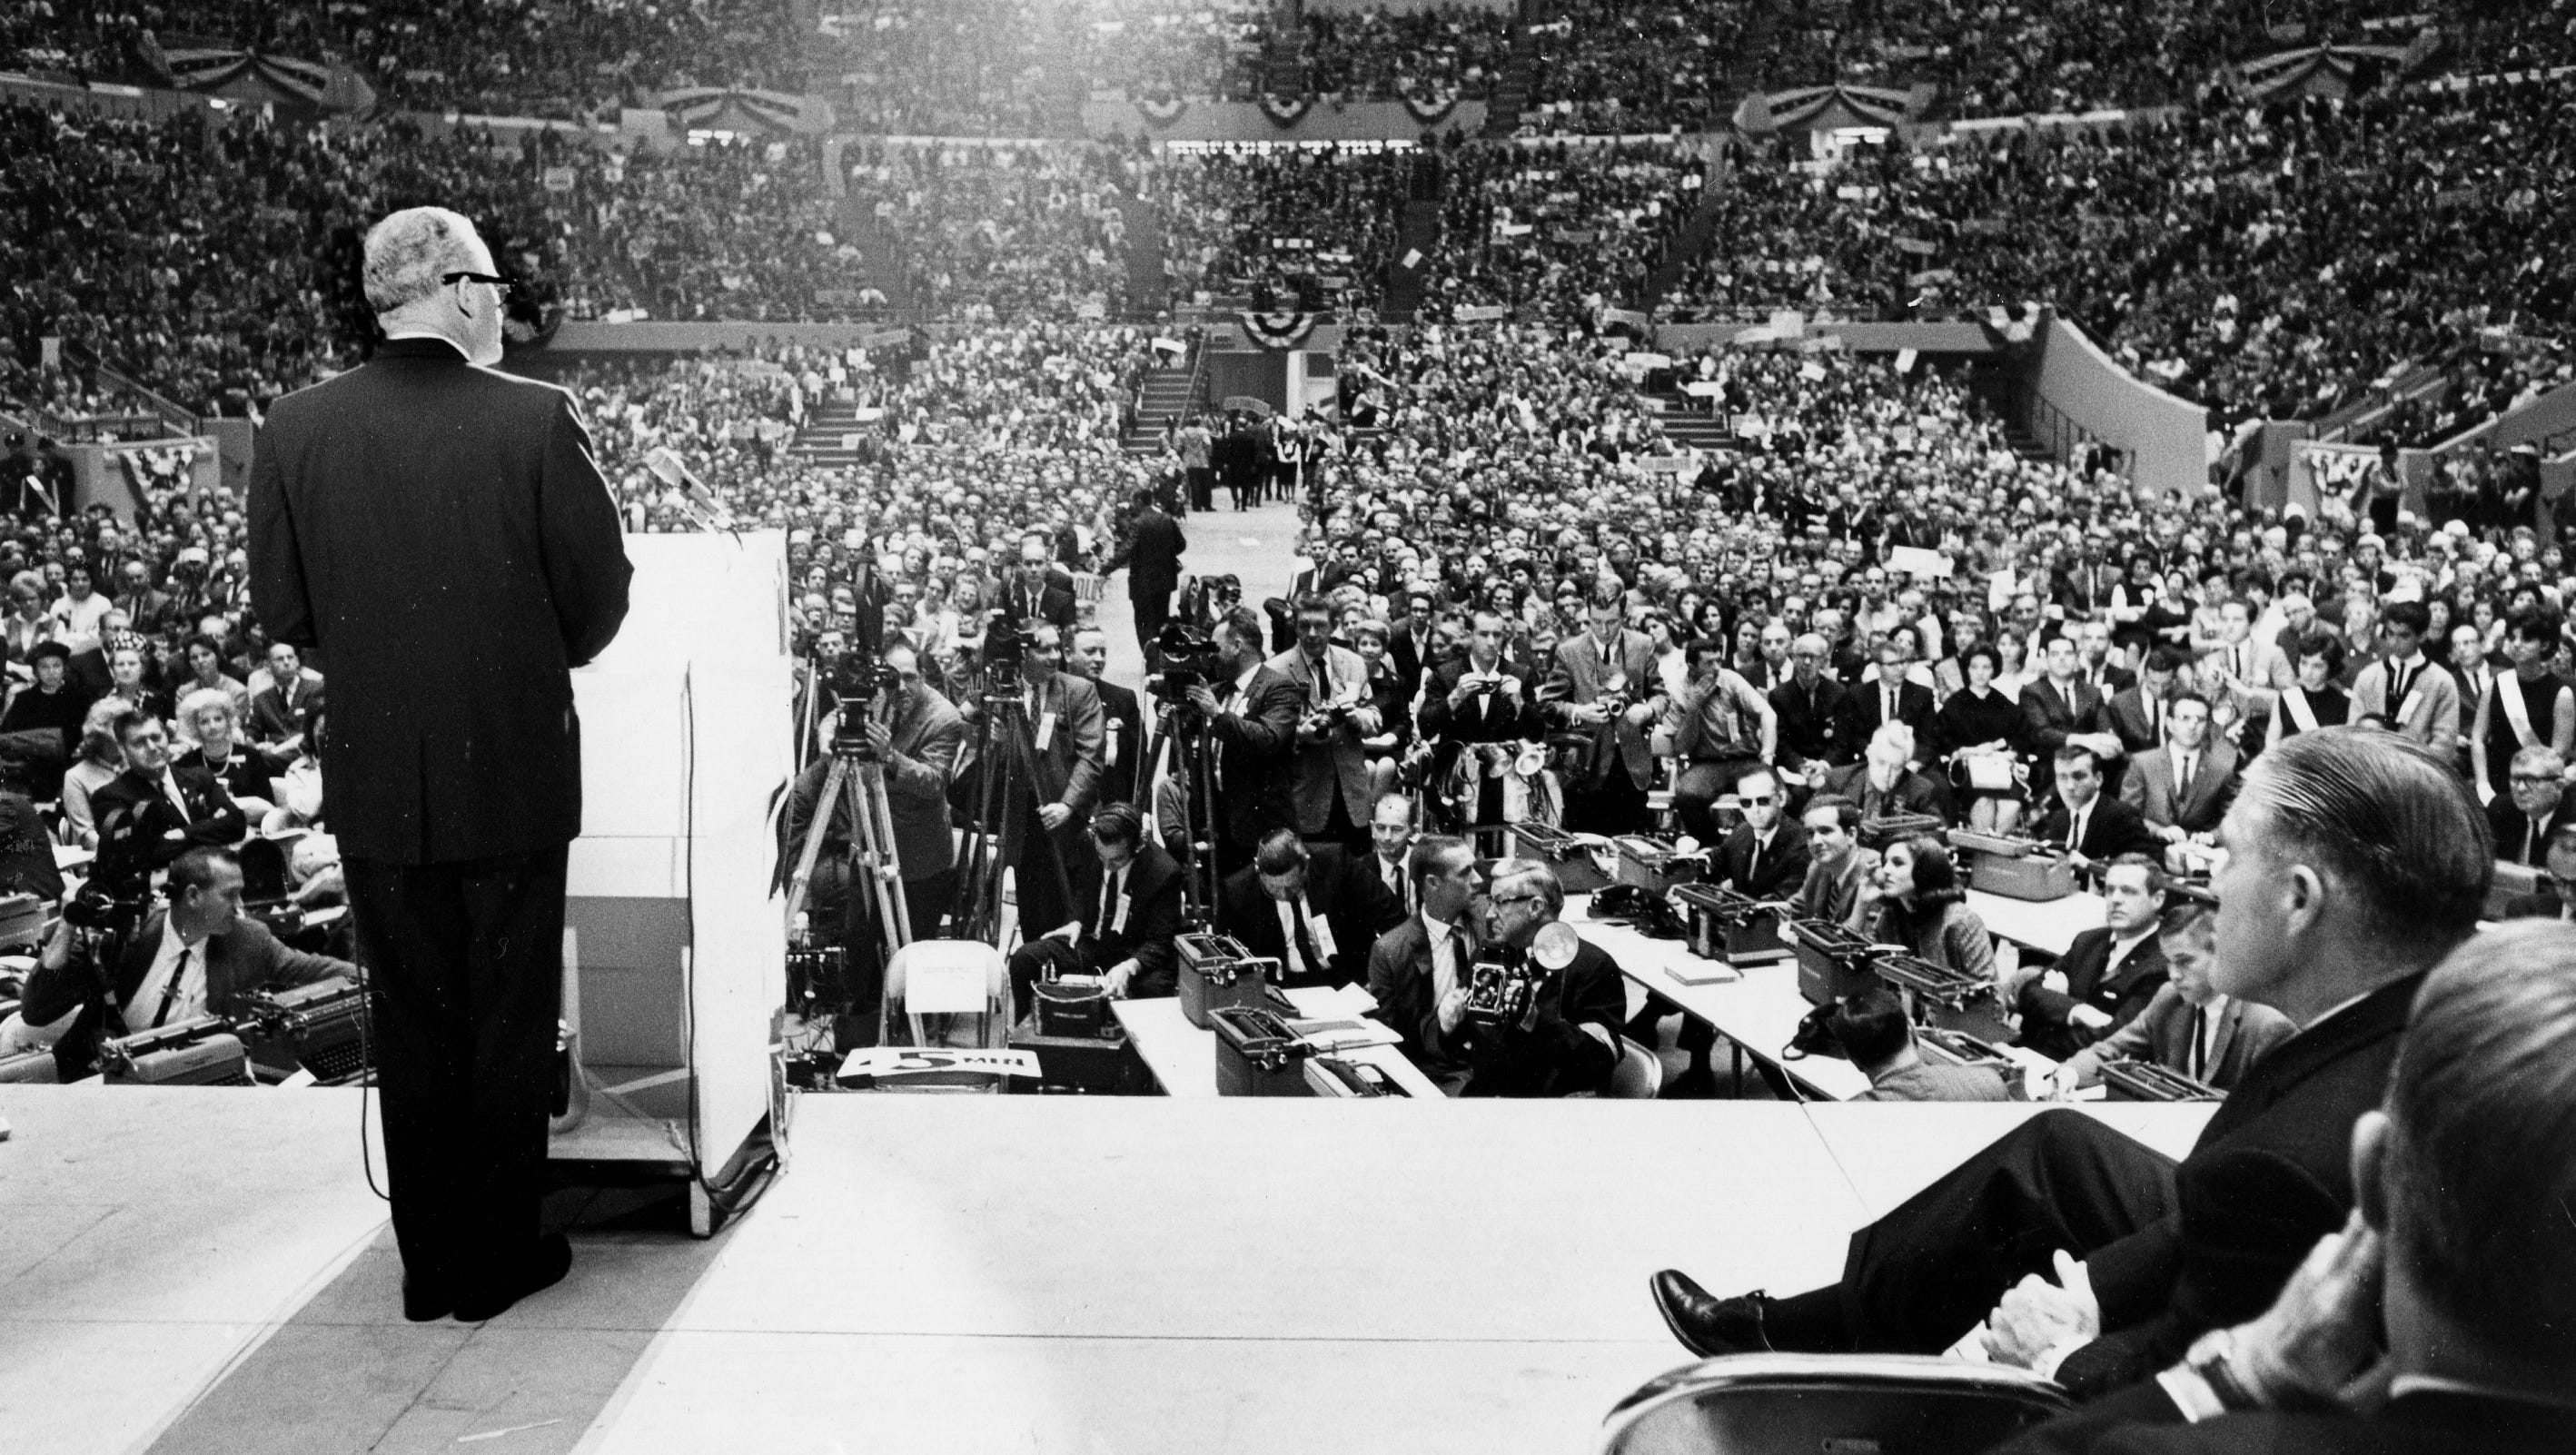 Republican presidential candidate Barry Goldwater speaks at Cobo Arena on Sept. 29, 1964.